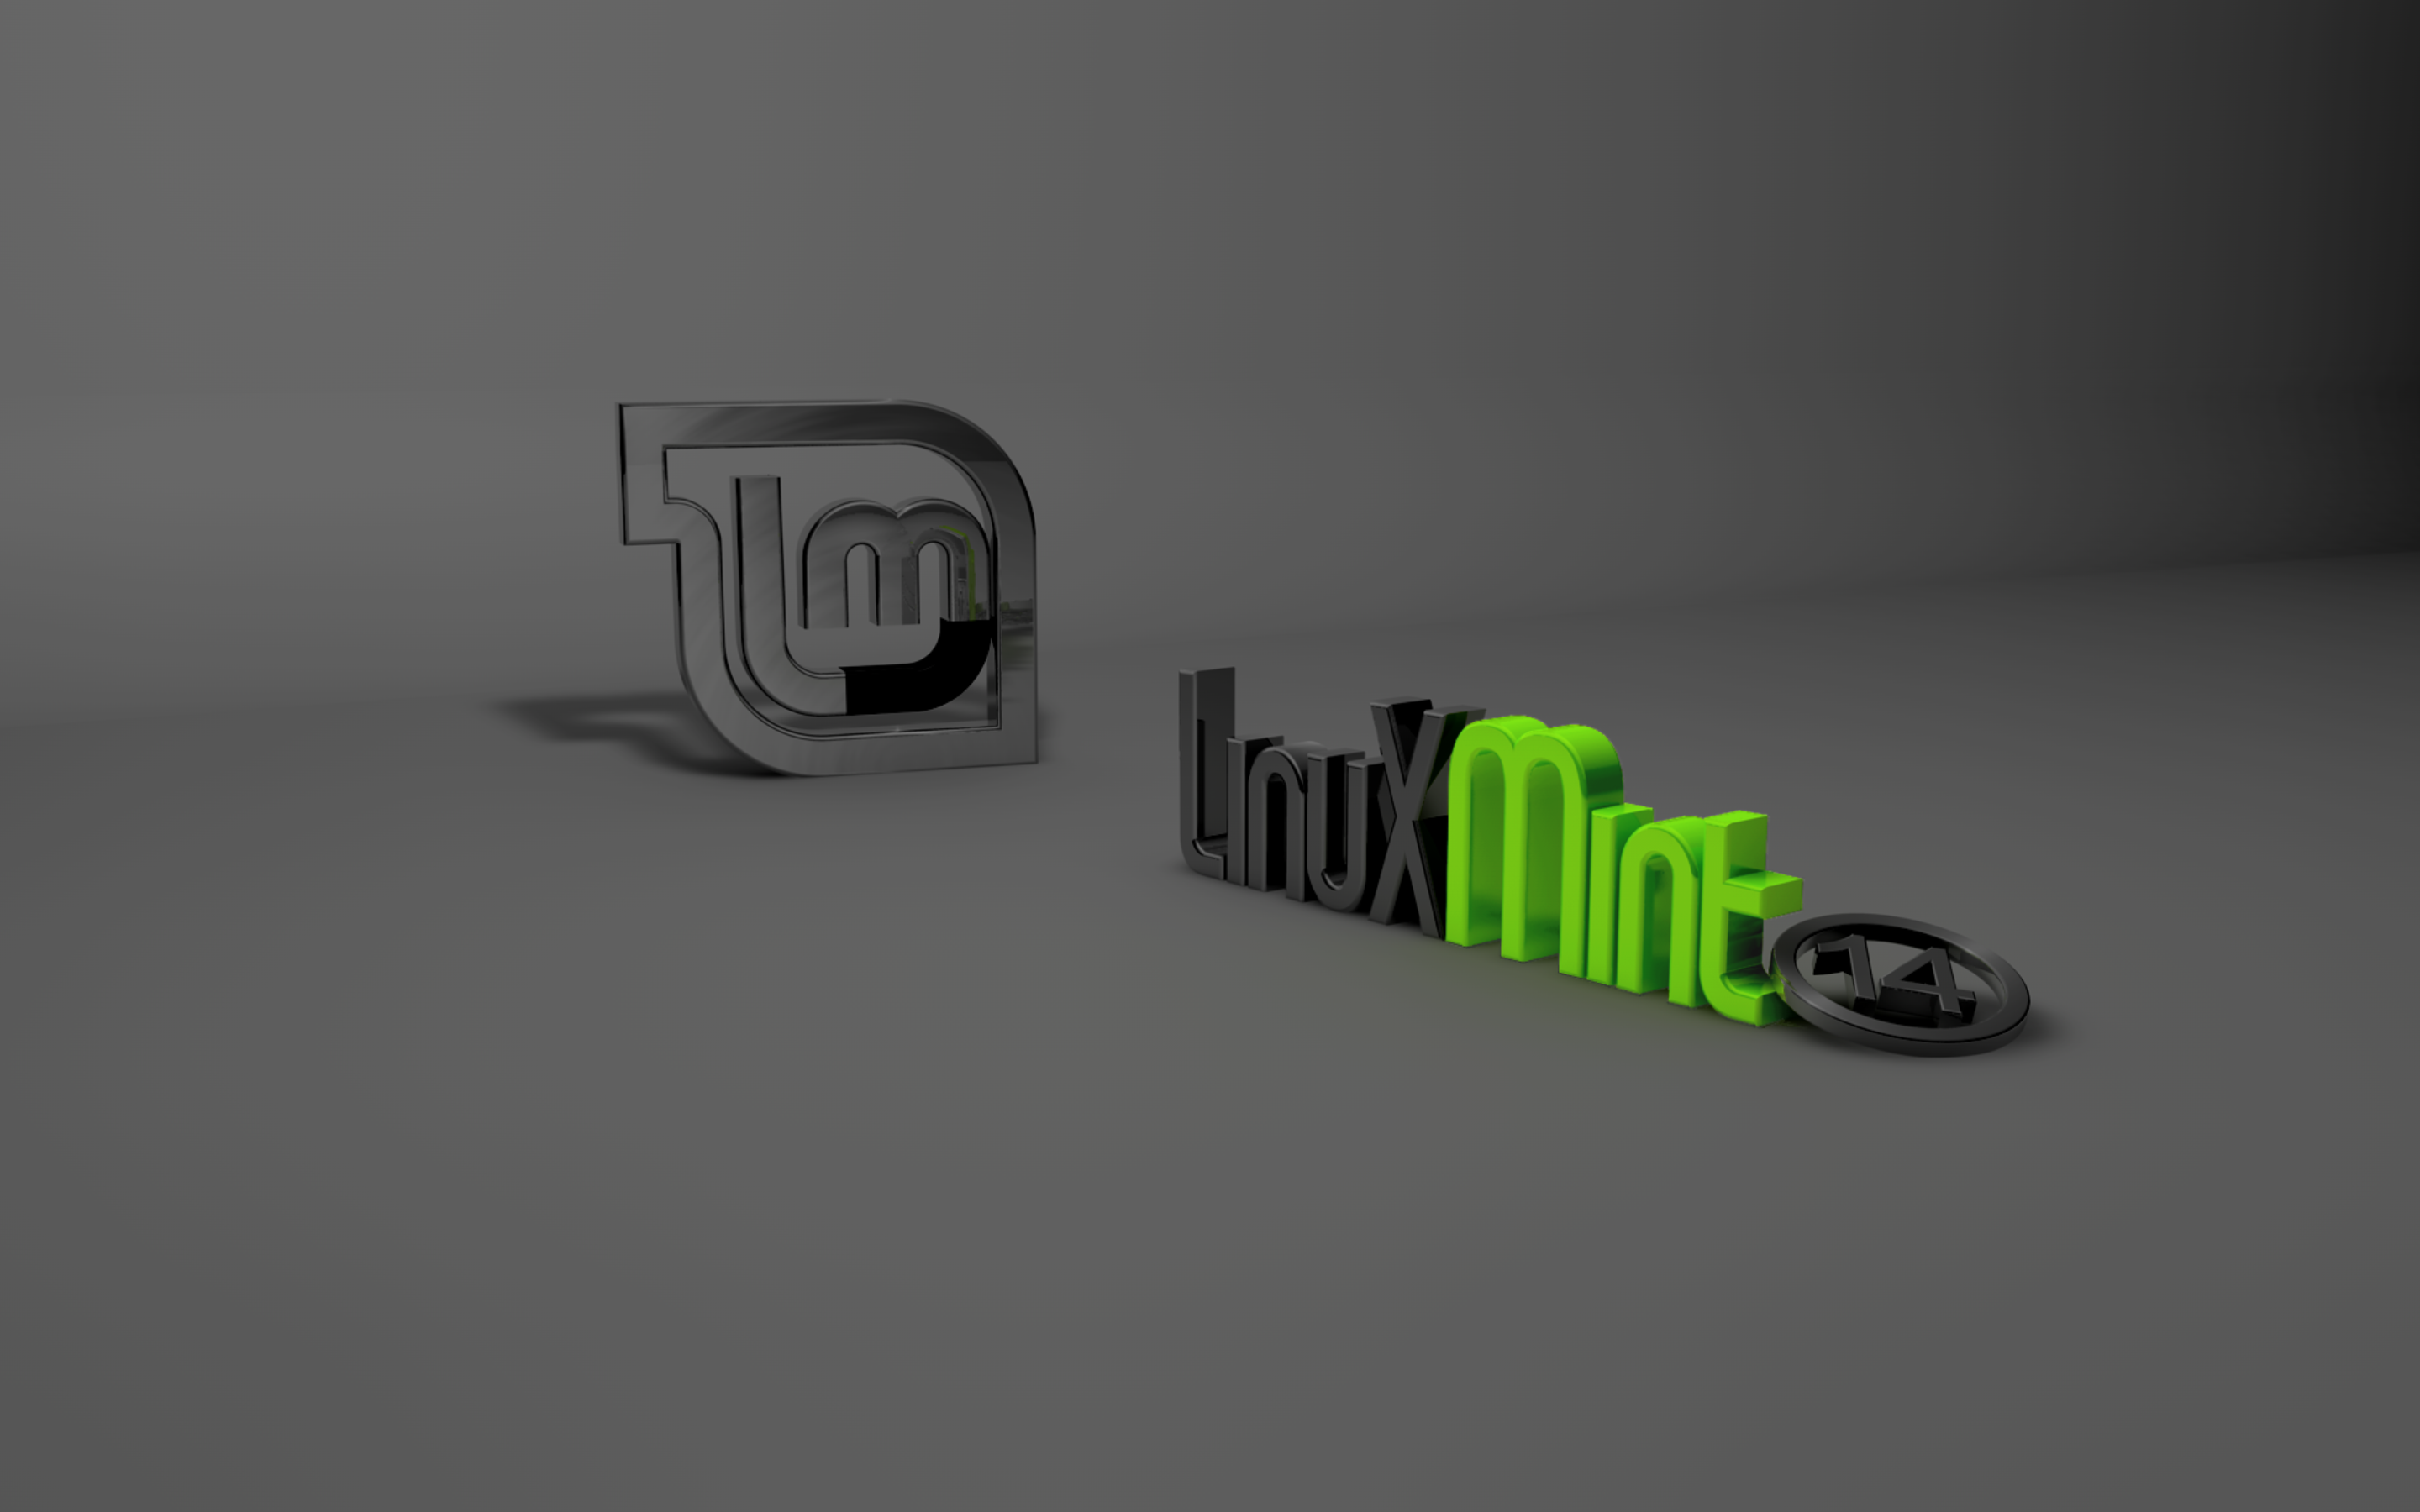 Download Linux Mint 20 Wallpapers